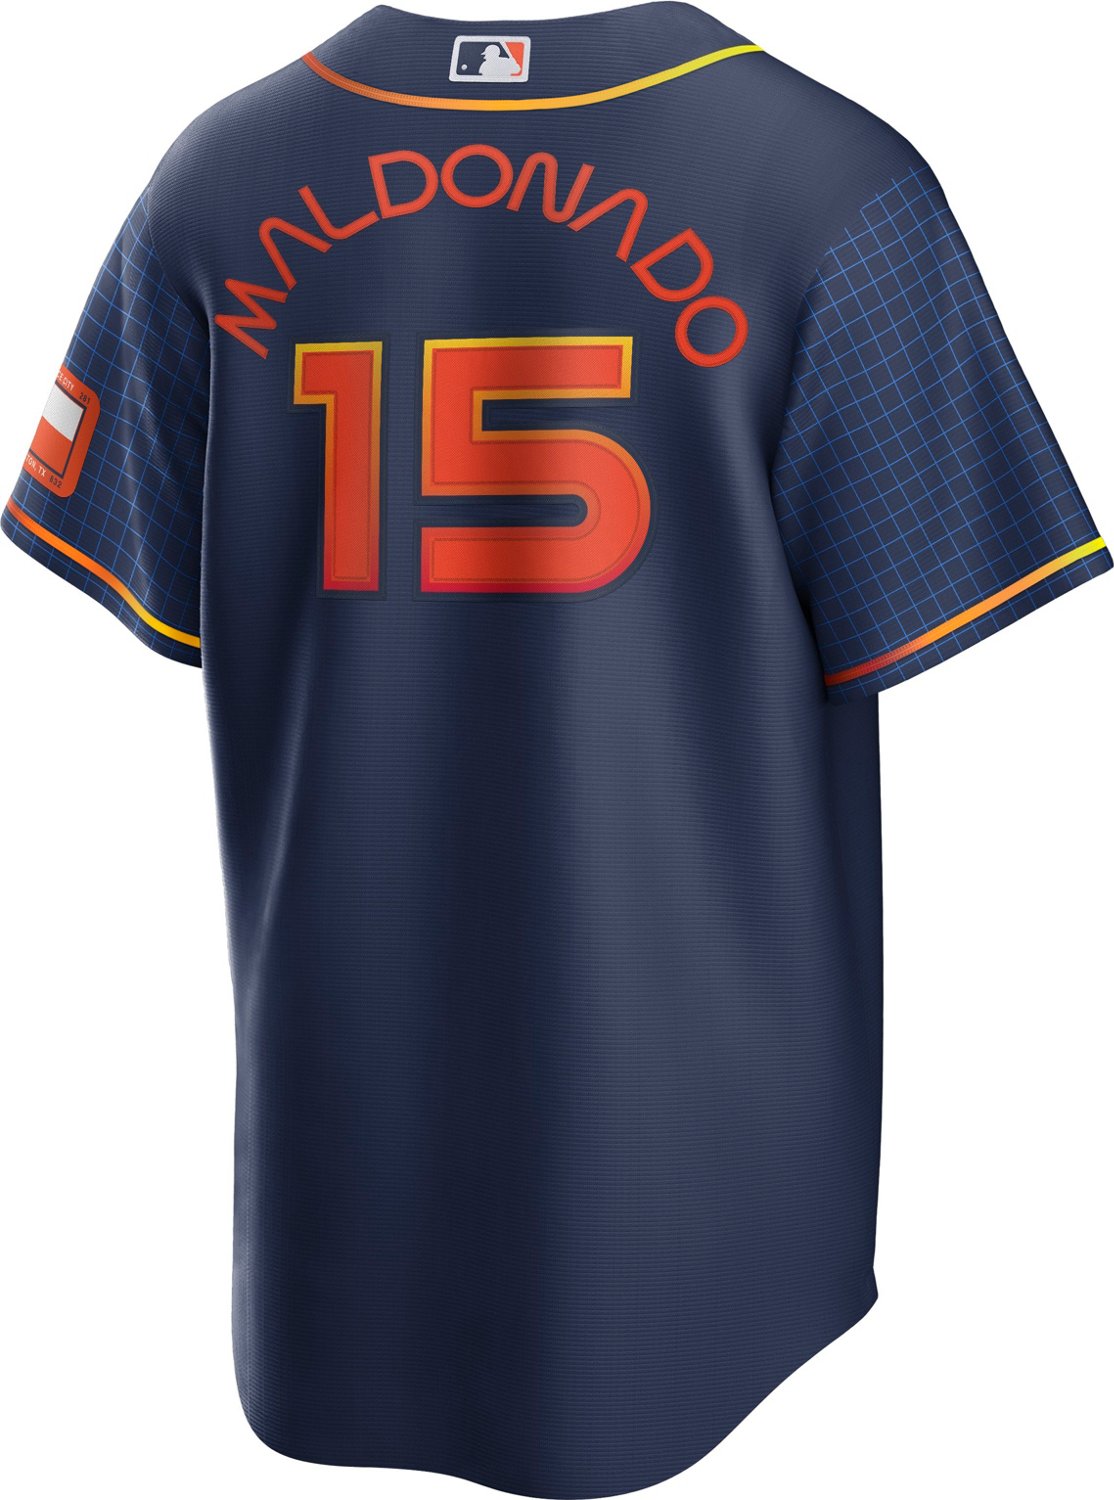 Youth Astros Martin Maldonado #15 White 2020 Home Cooperstown Collection Jersey